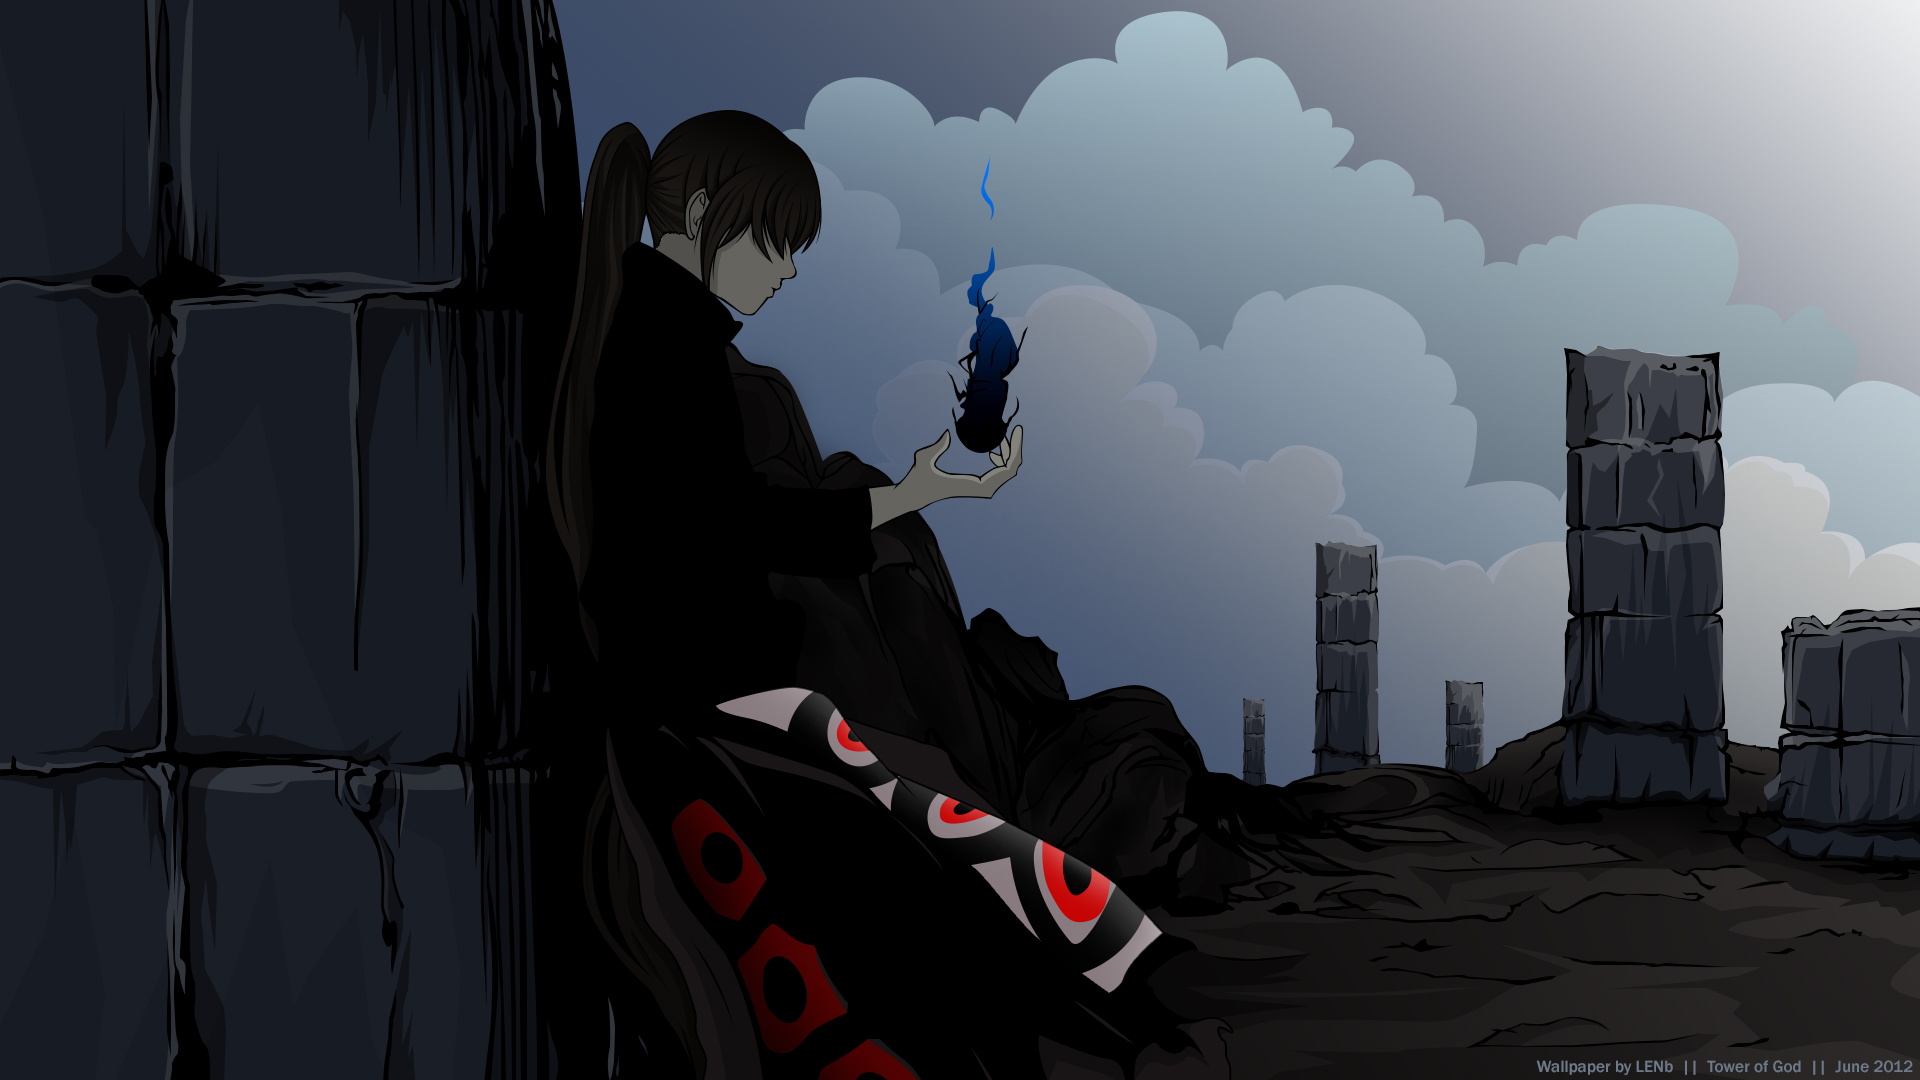 Tower of God image - Anime Fans of modDB.